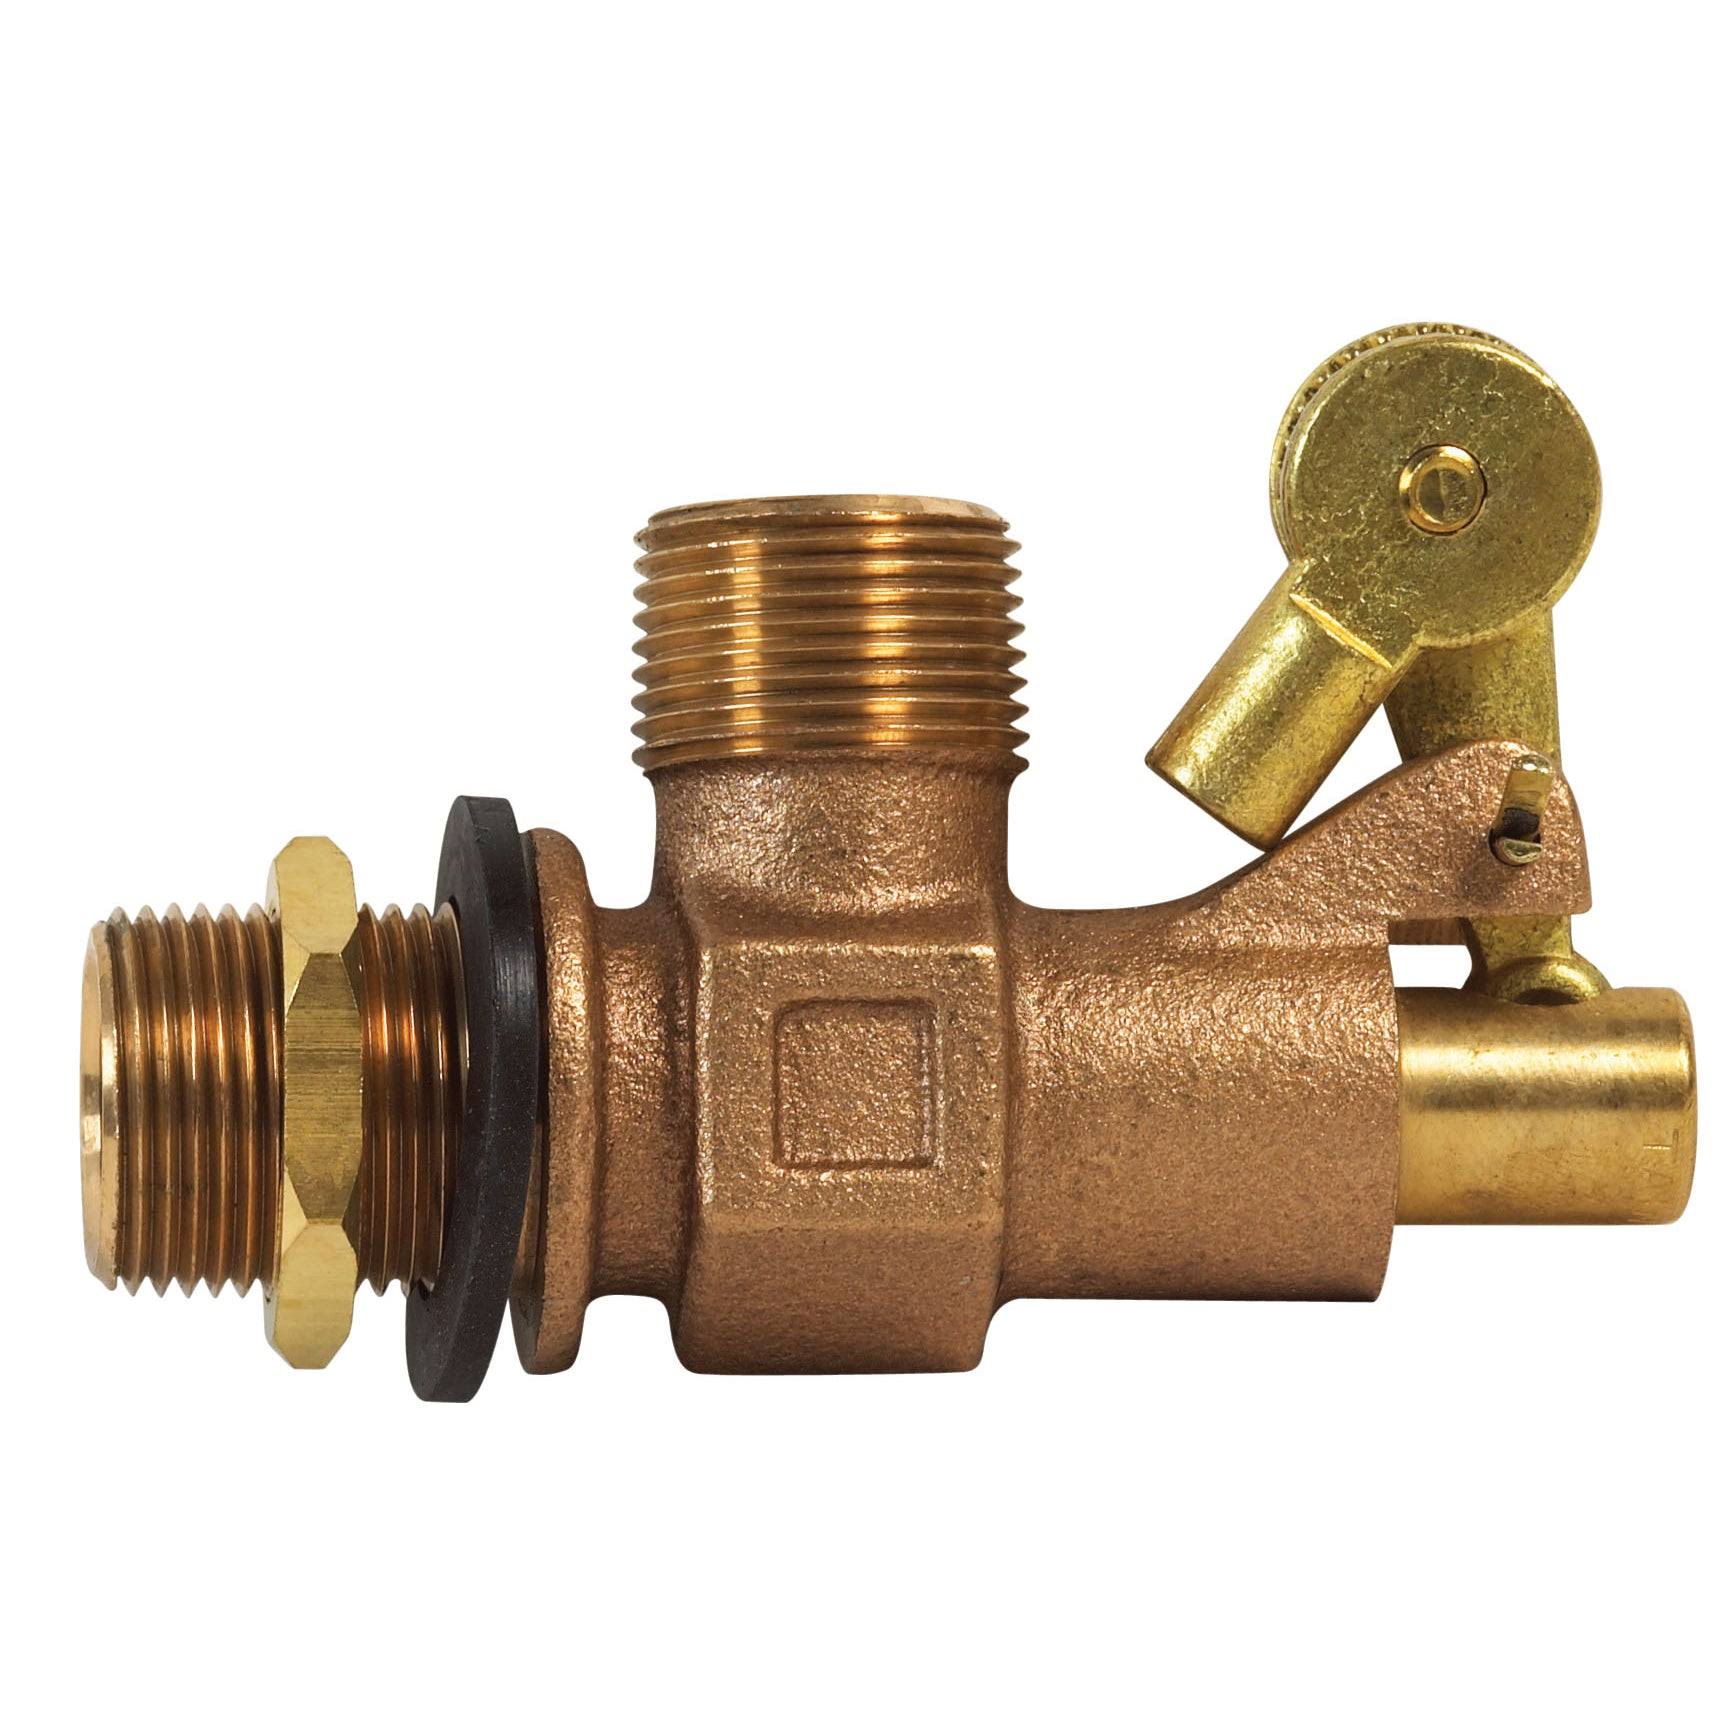 B and K Industries 109-814 Float Valves - 3/4"